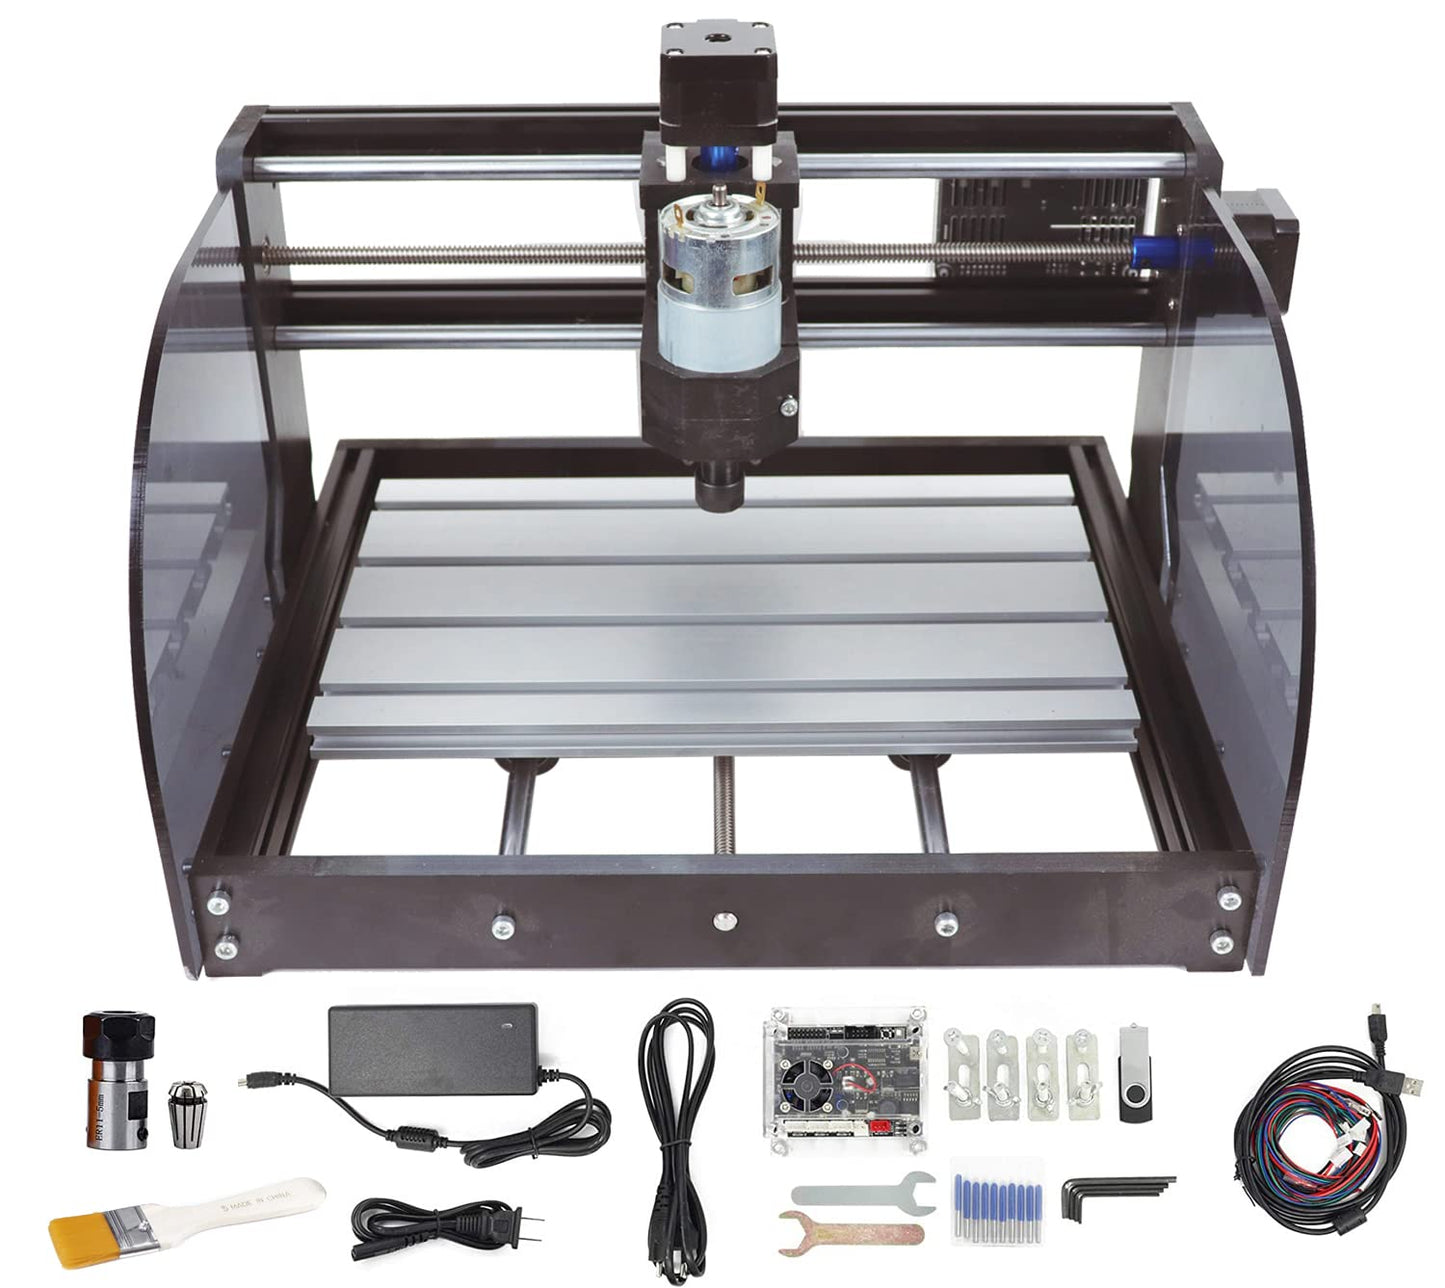 RATTMMOTOR CNC 3018 PRO MAX CNC Router Machine Kit DIY Mini CNC Wood Router Machine 3 Axis GRBL Control Engraver Milling Cutting Machine Working Area